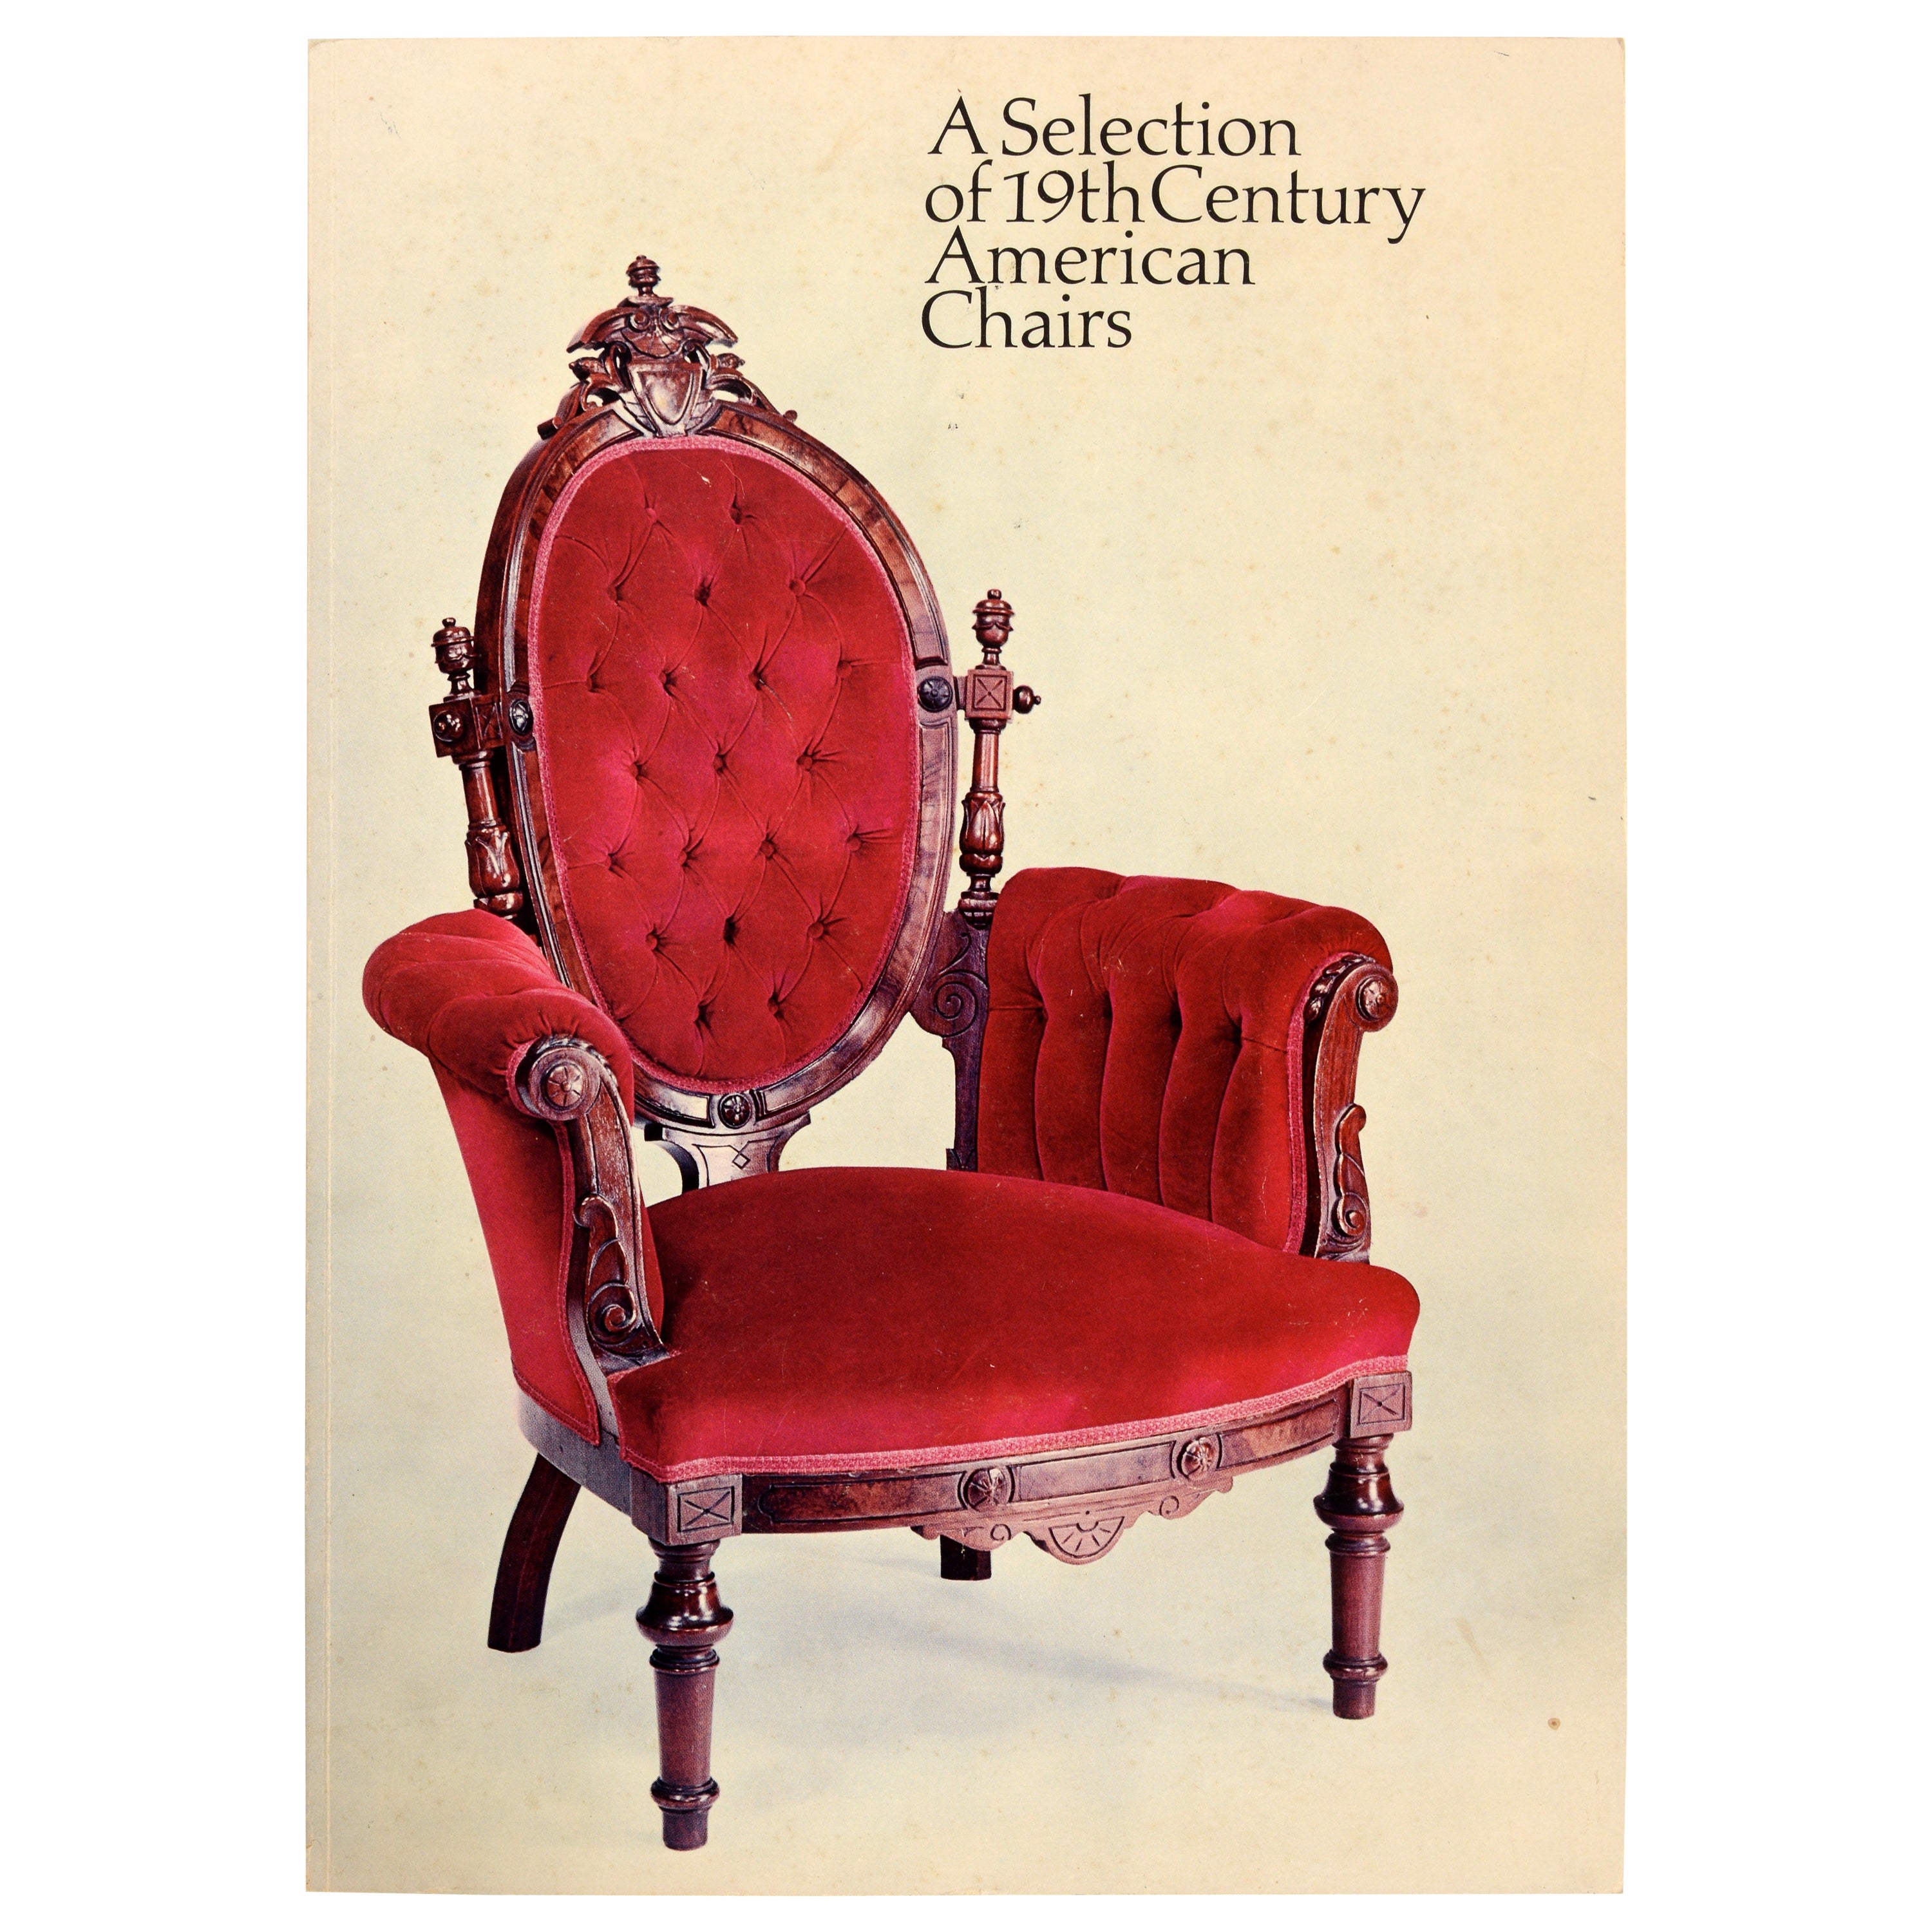 Selection of 19th c American Chairs, Exhib. Catalog Signed by the Author, 1st Ed